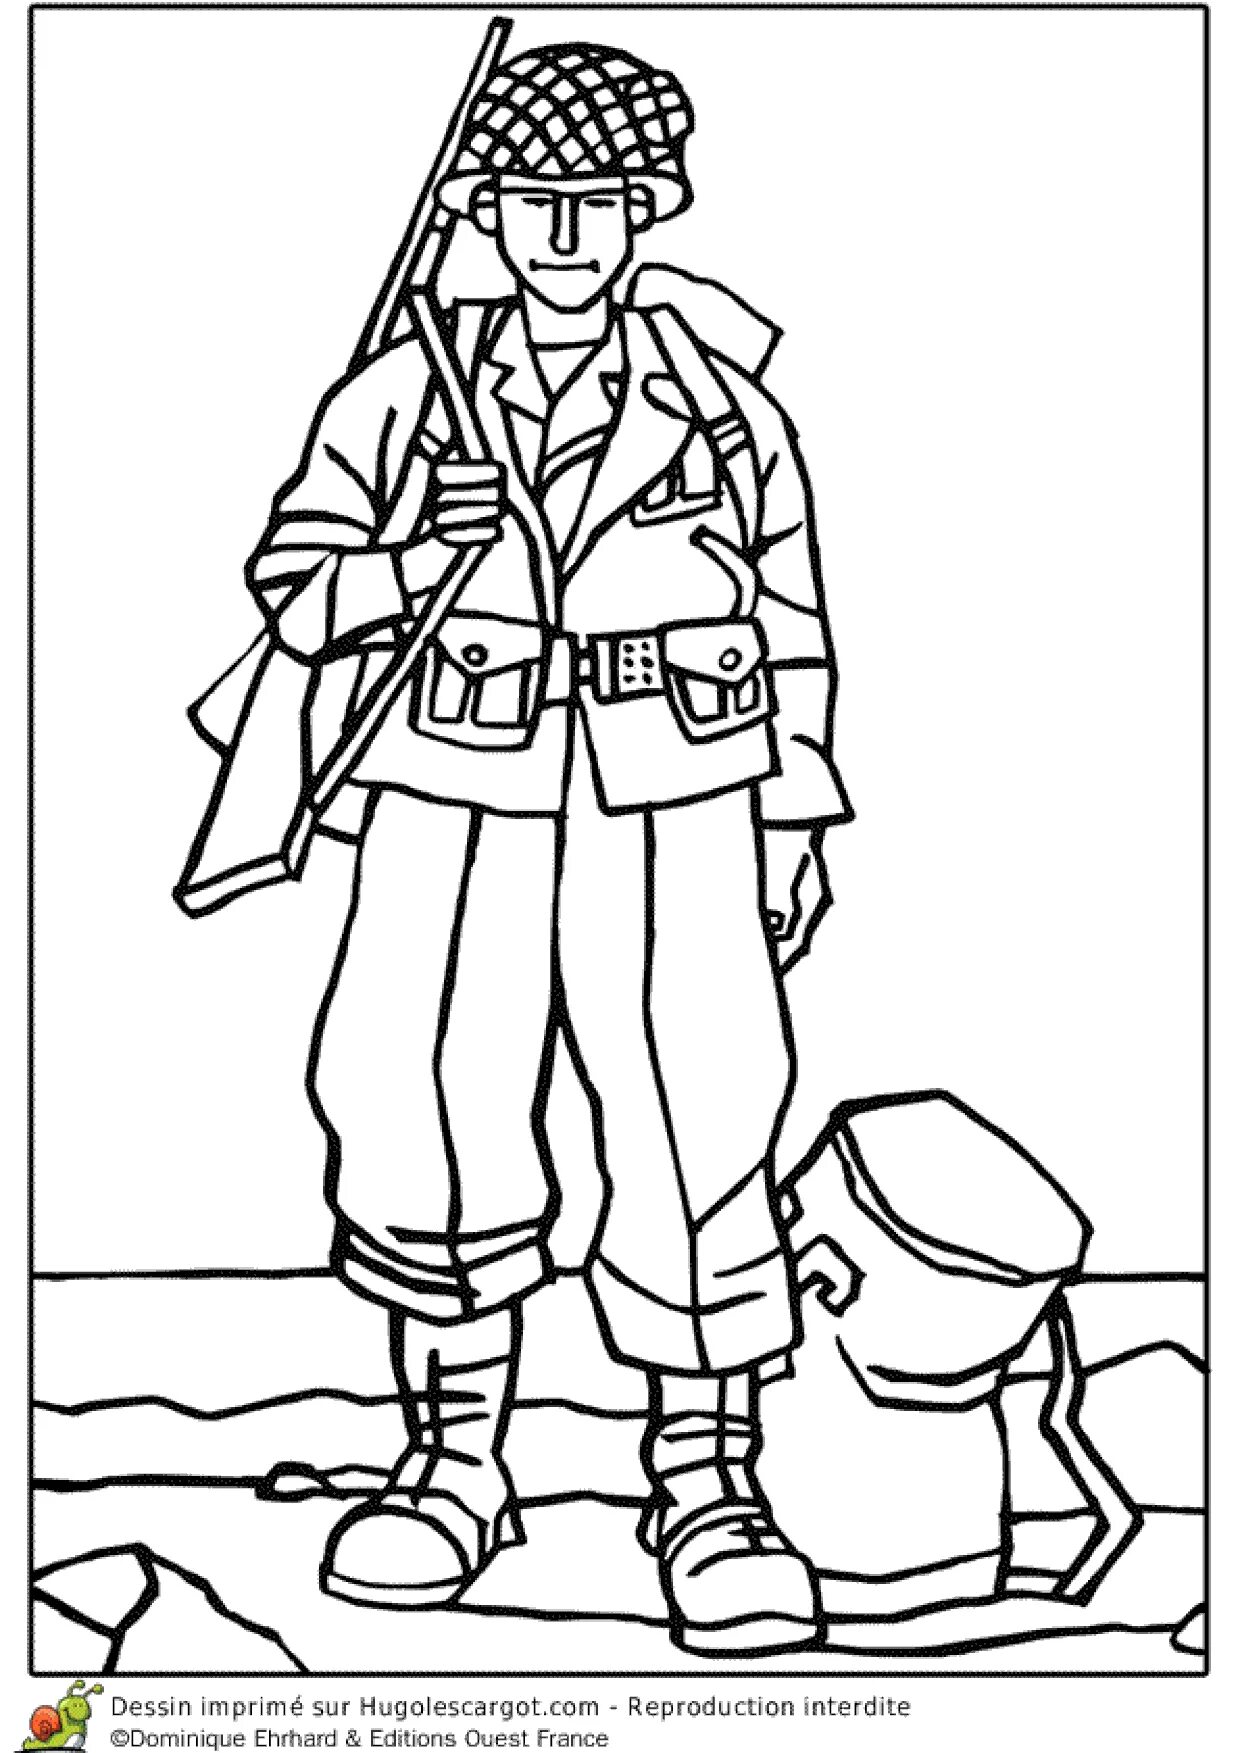 Exquisite Russian army soldiers coloring book